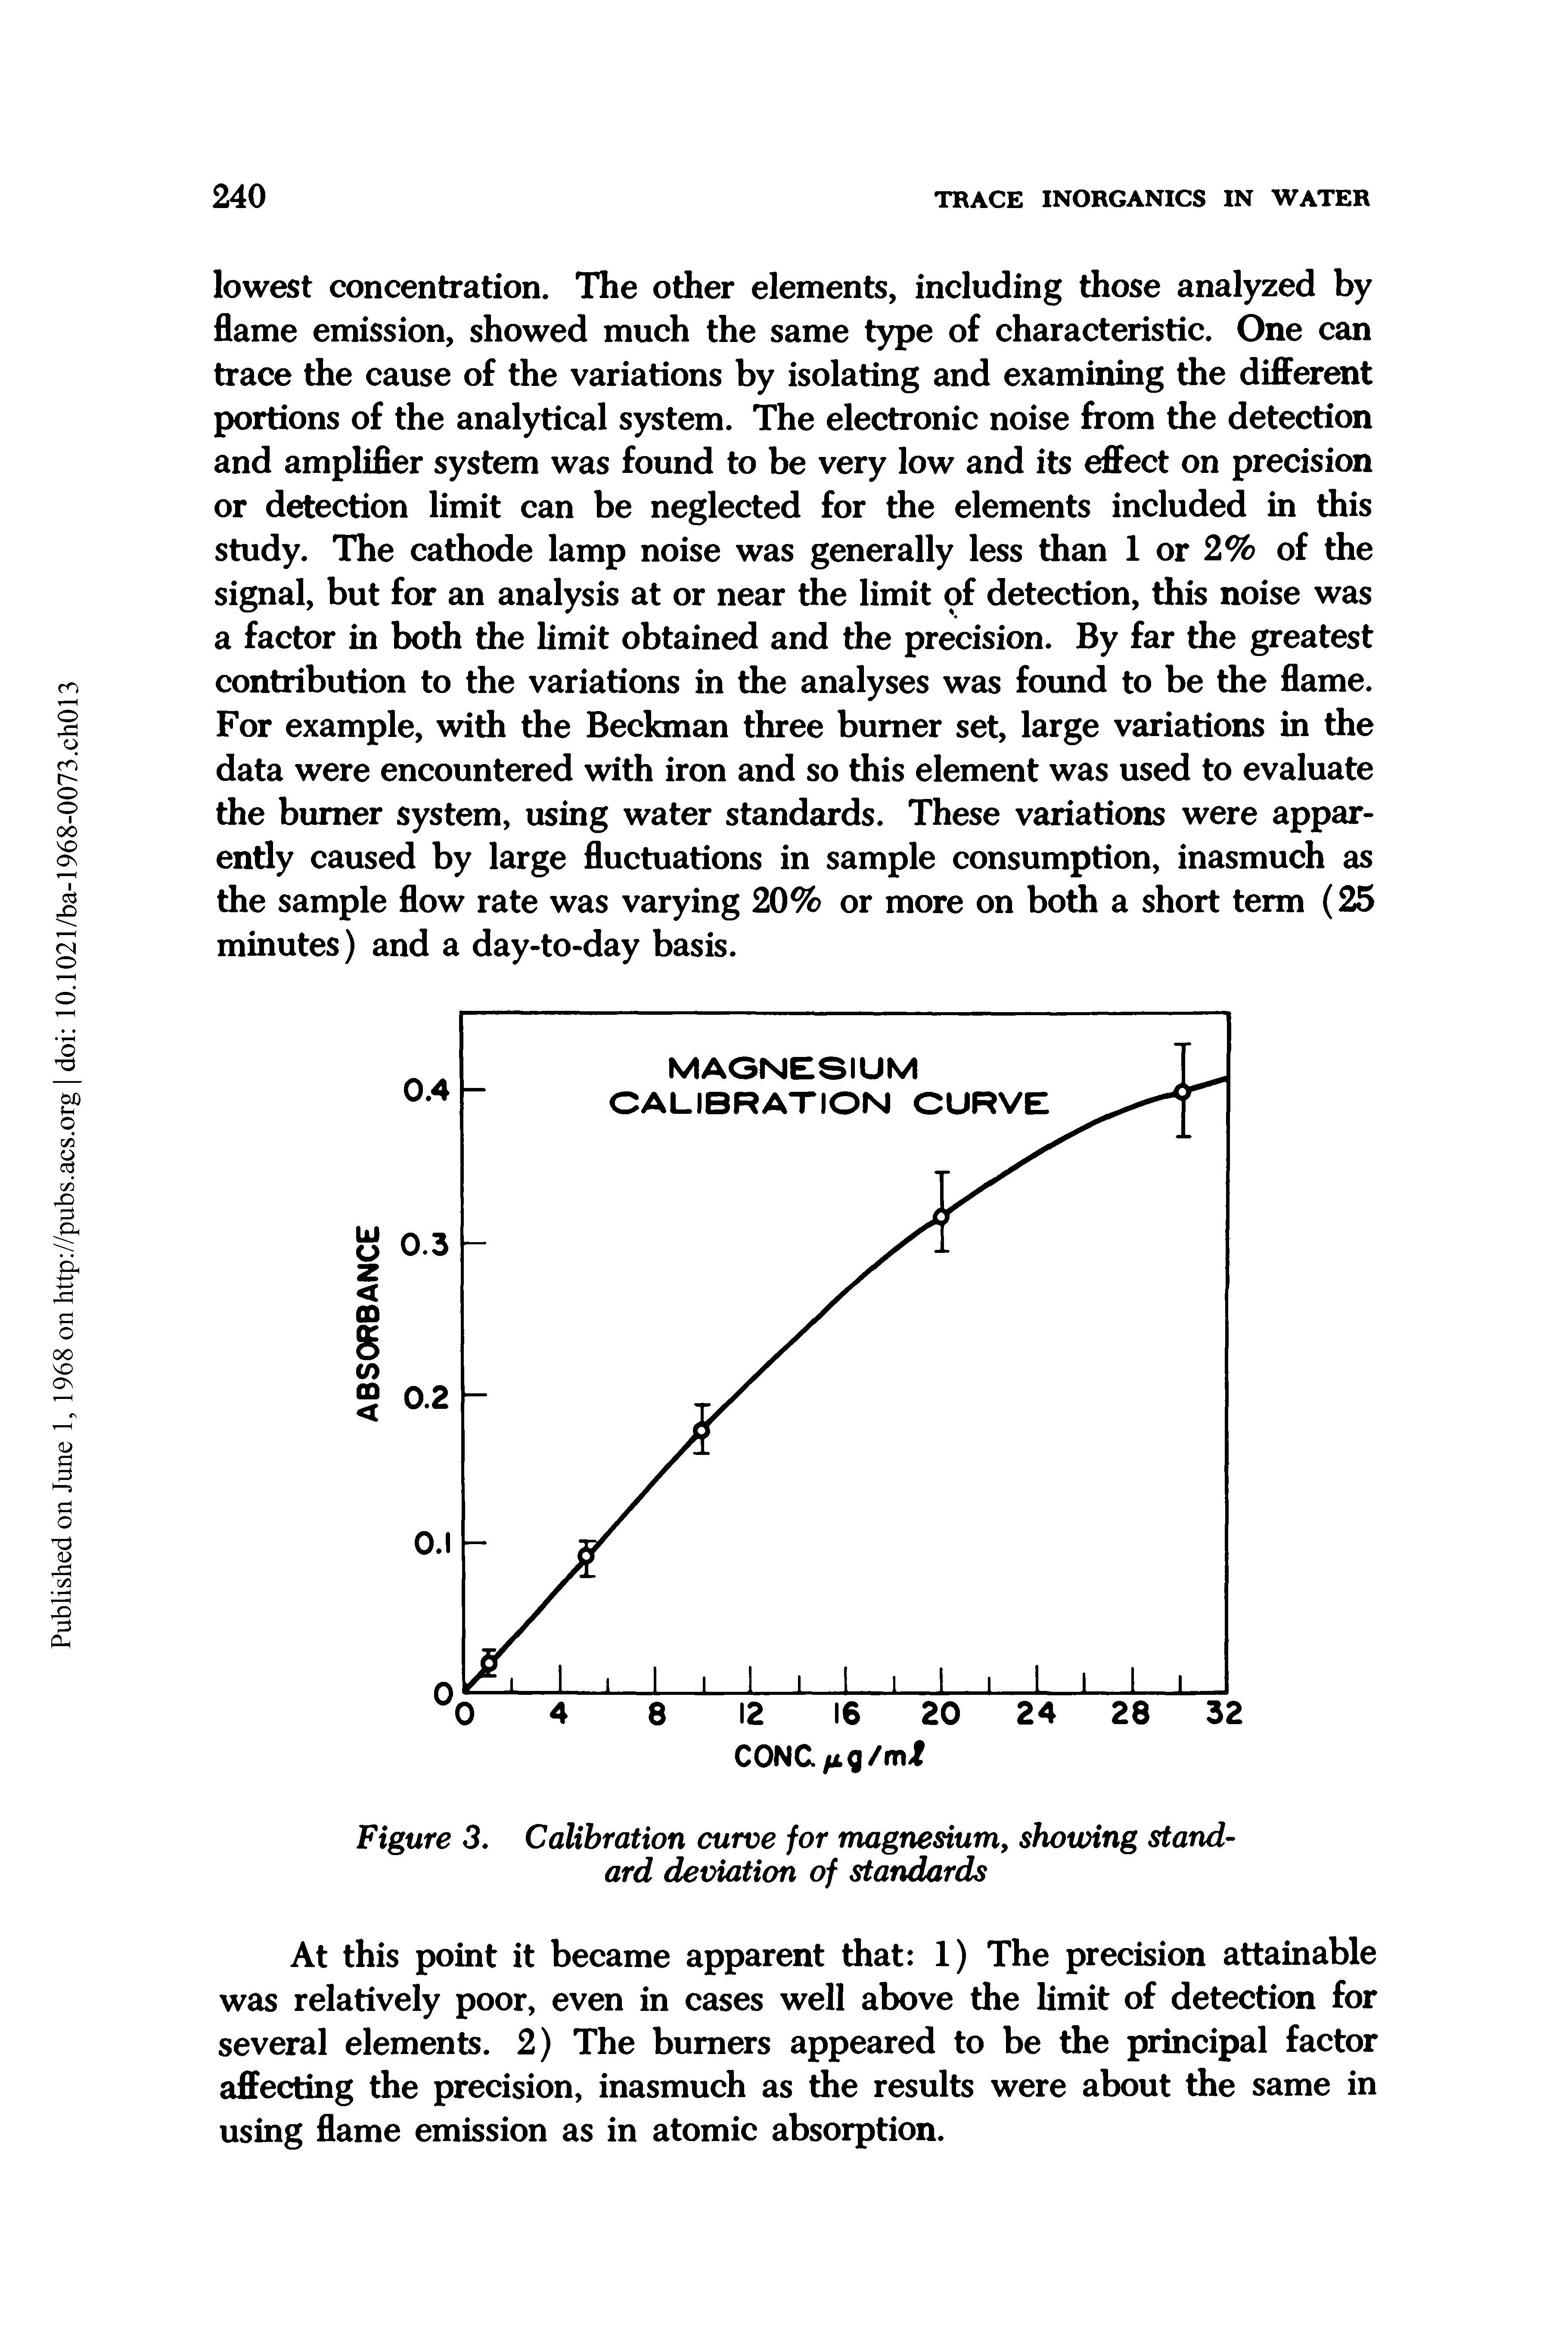 Figure 3. Calibration curve for magnesium, showing stand-ard deviation of standards...